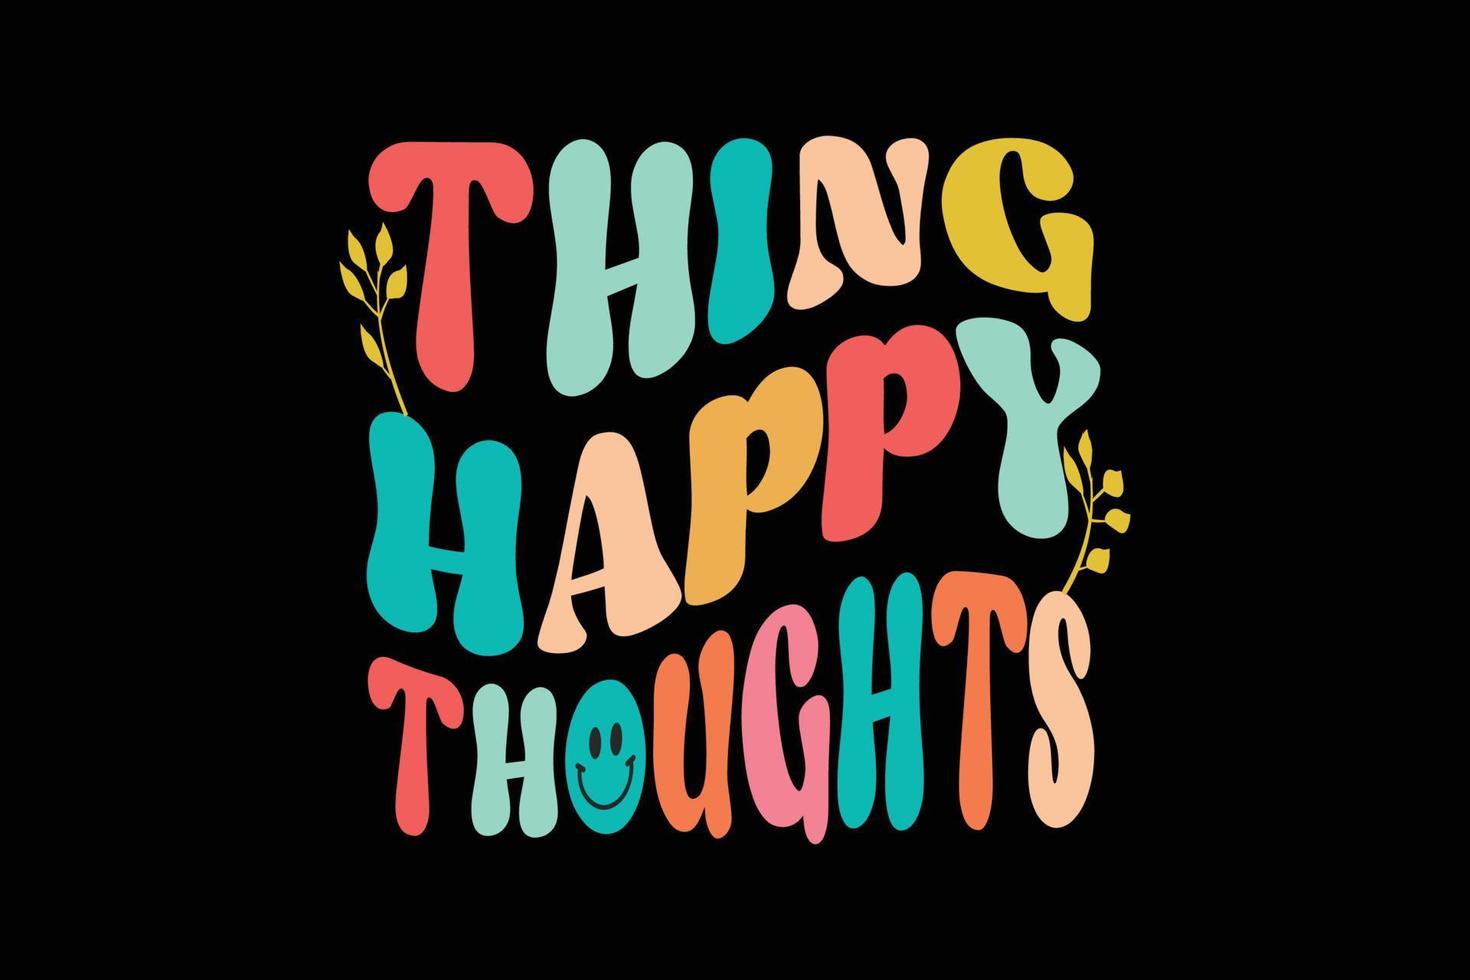 Thing happy thoughts retro t shirt design vector